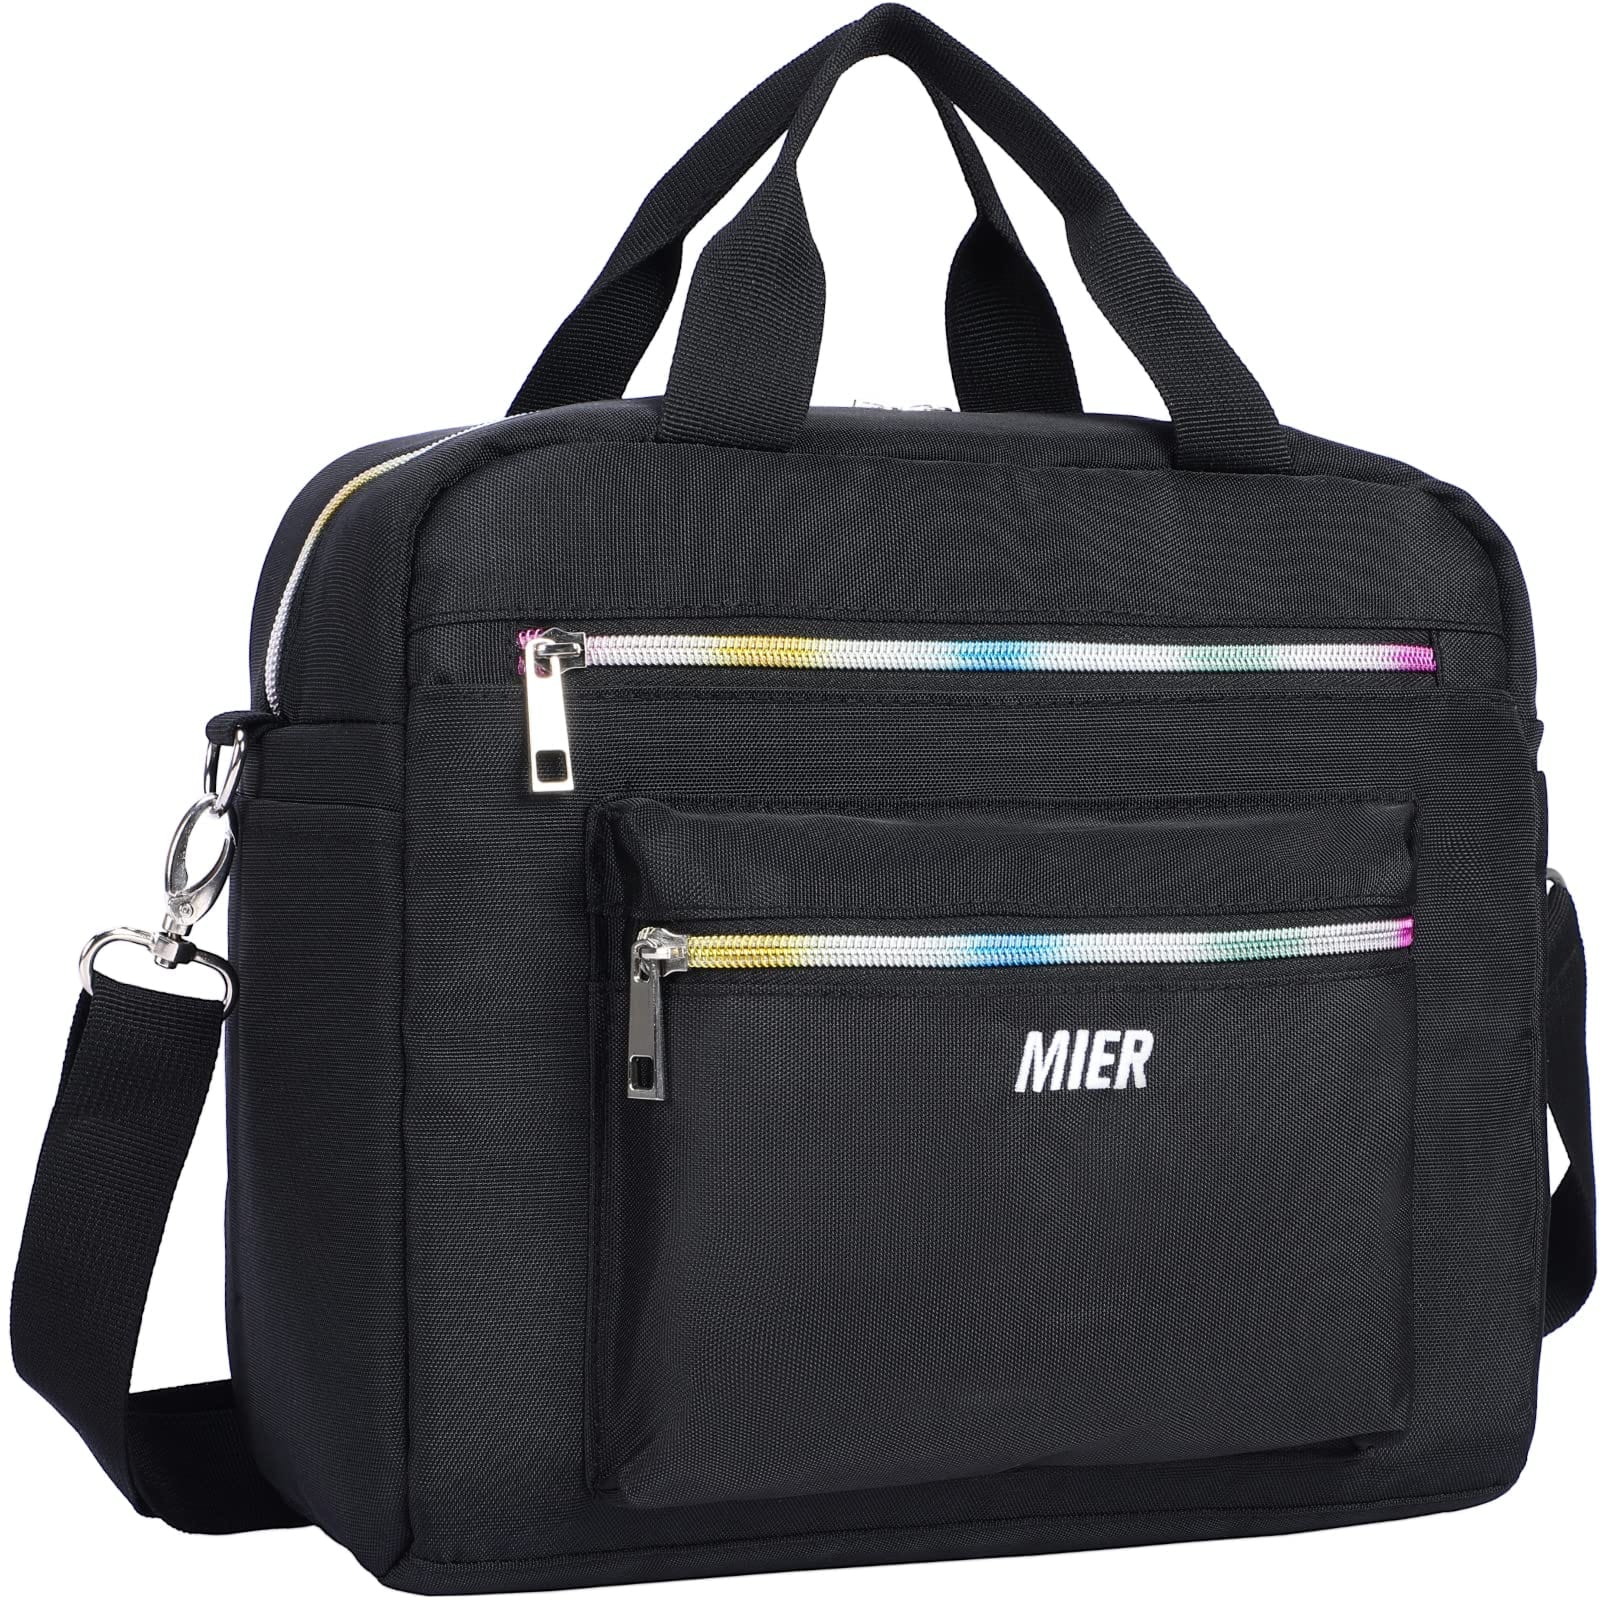 MIER Women Lunch Totes Stylish Insulated Lunchbox Bag, Black Rainbow Zipper